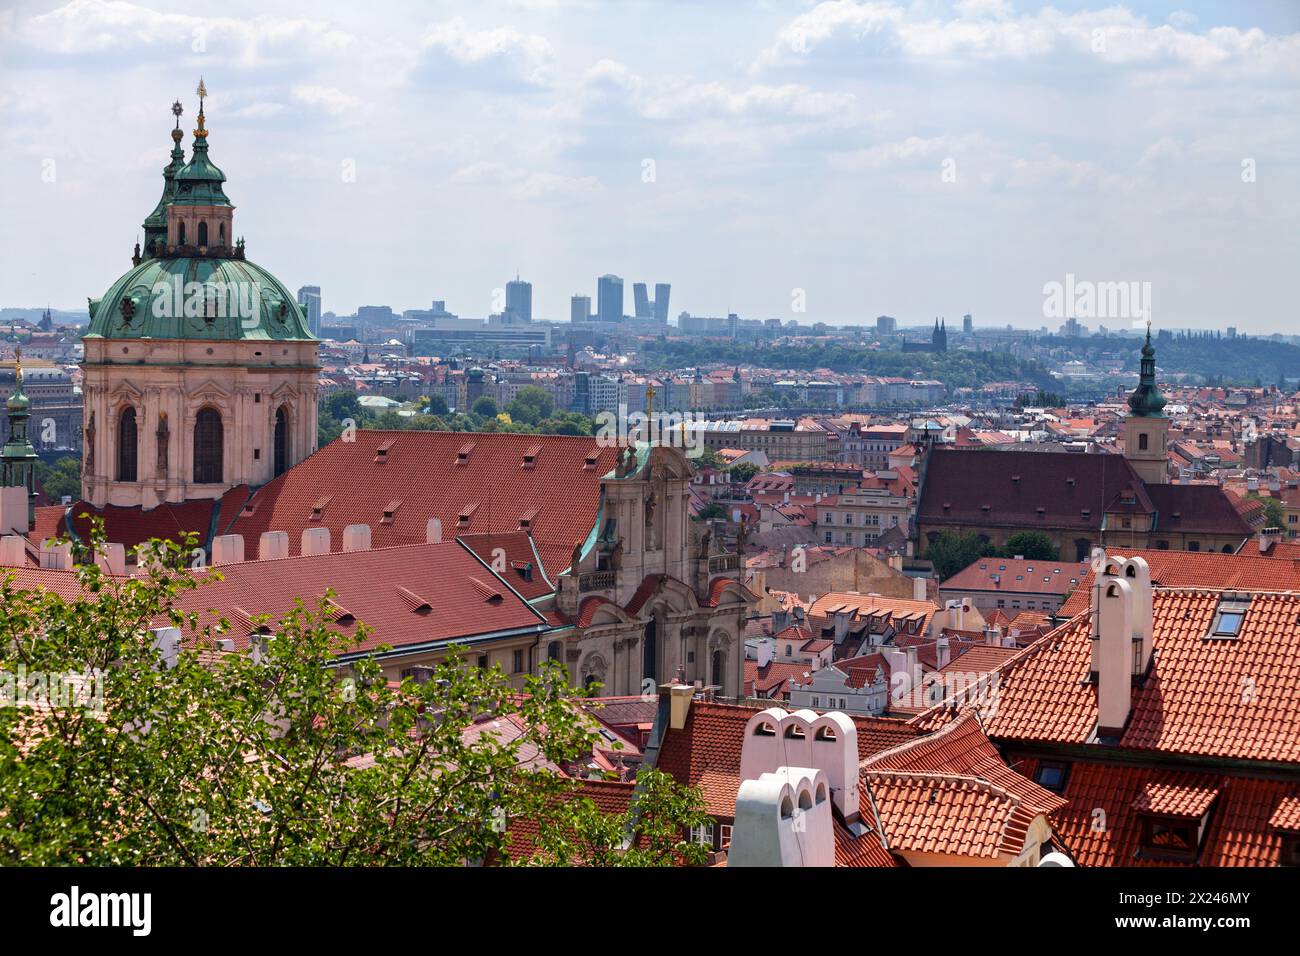 St. Nicholas Church with behind the Church of Our Lady Victorious and The Infant Jesus of Prague, the Basilica of St Peter and St Paul, the Prague Con Stock Photo